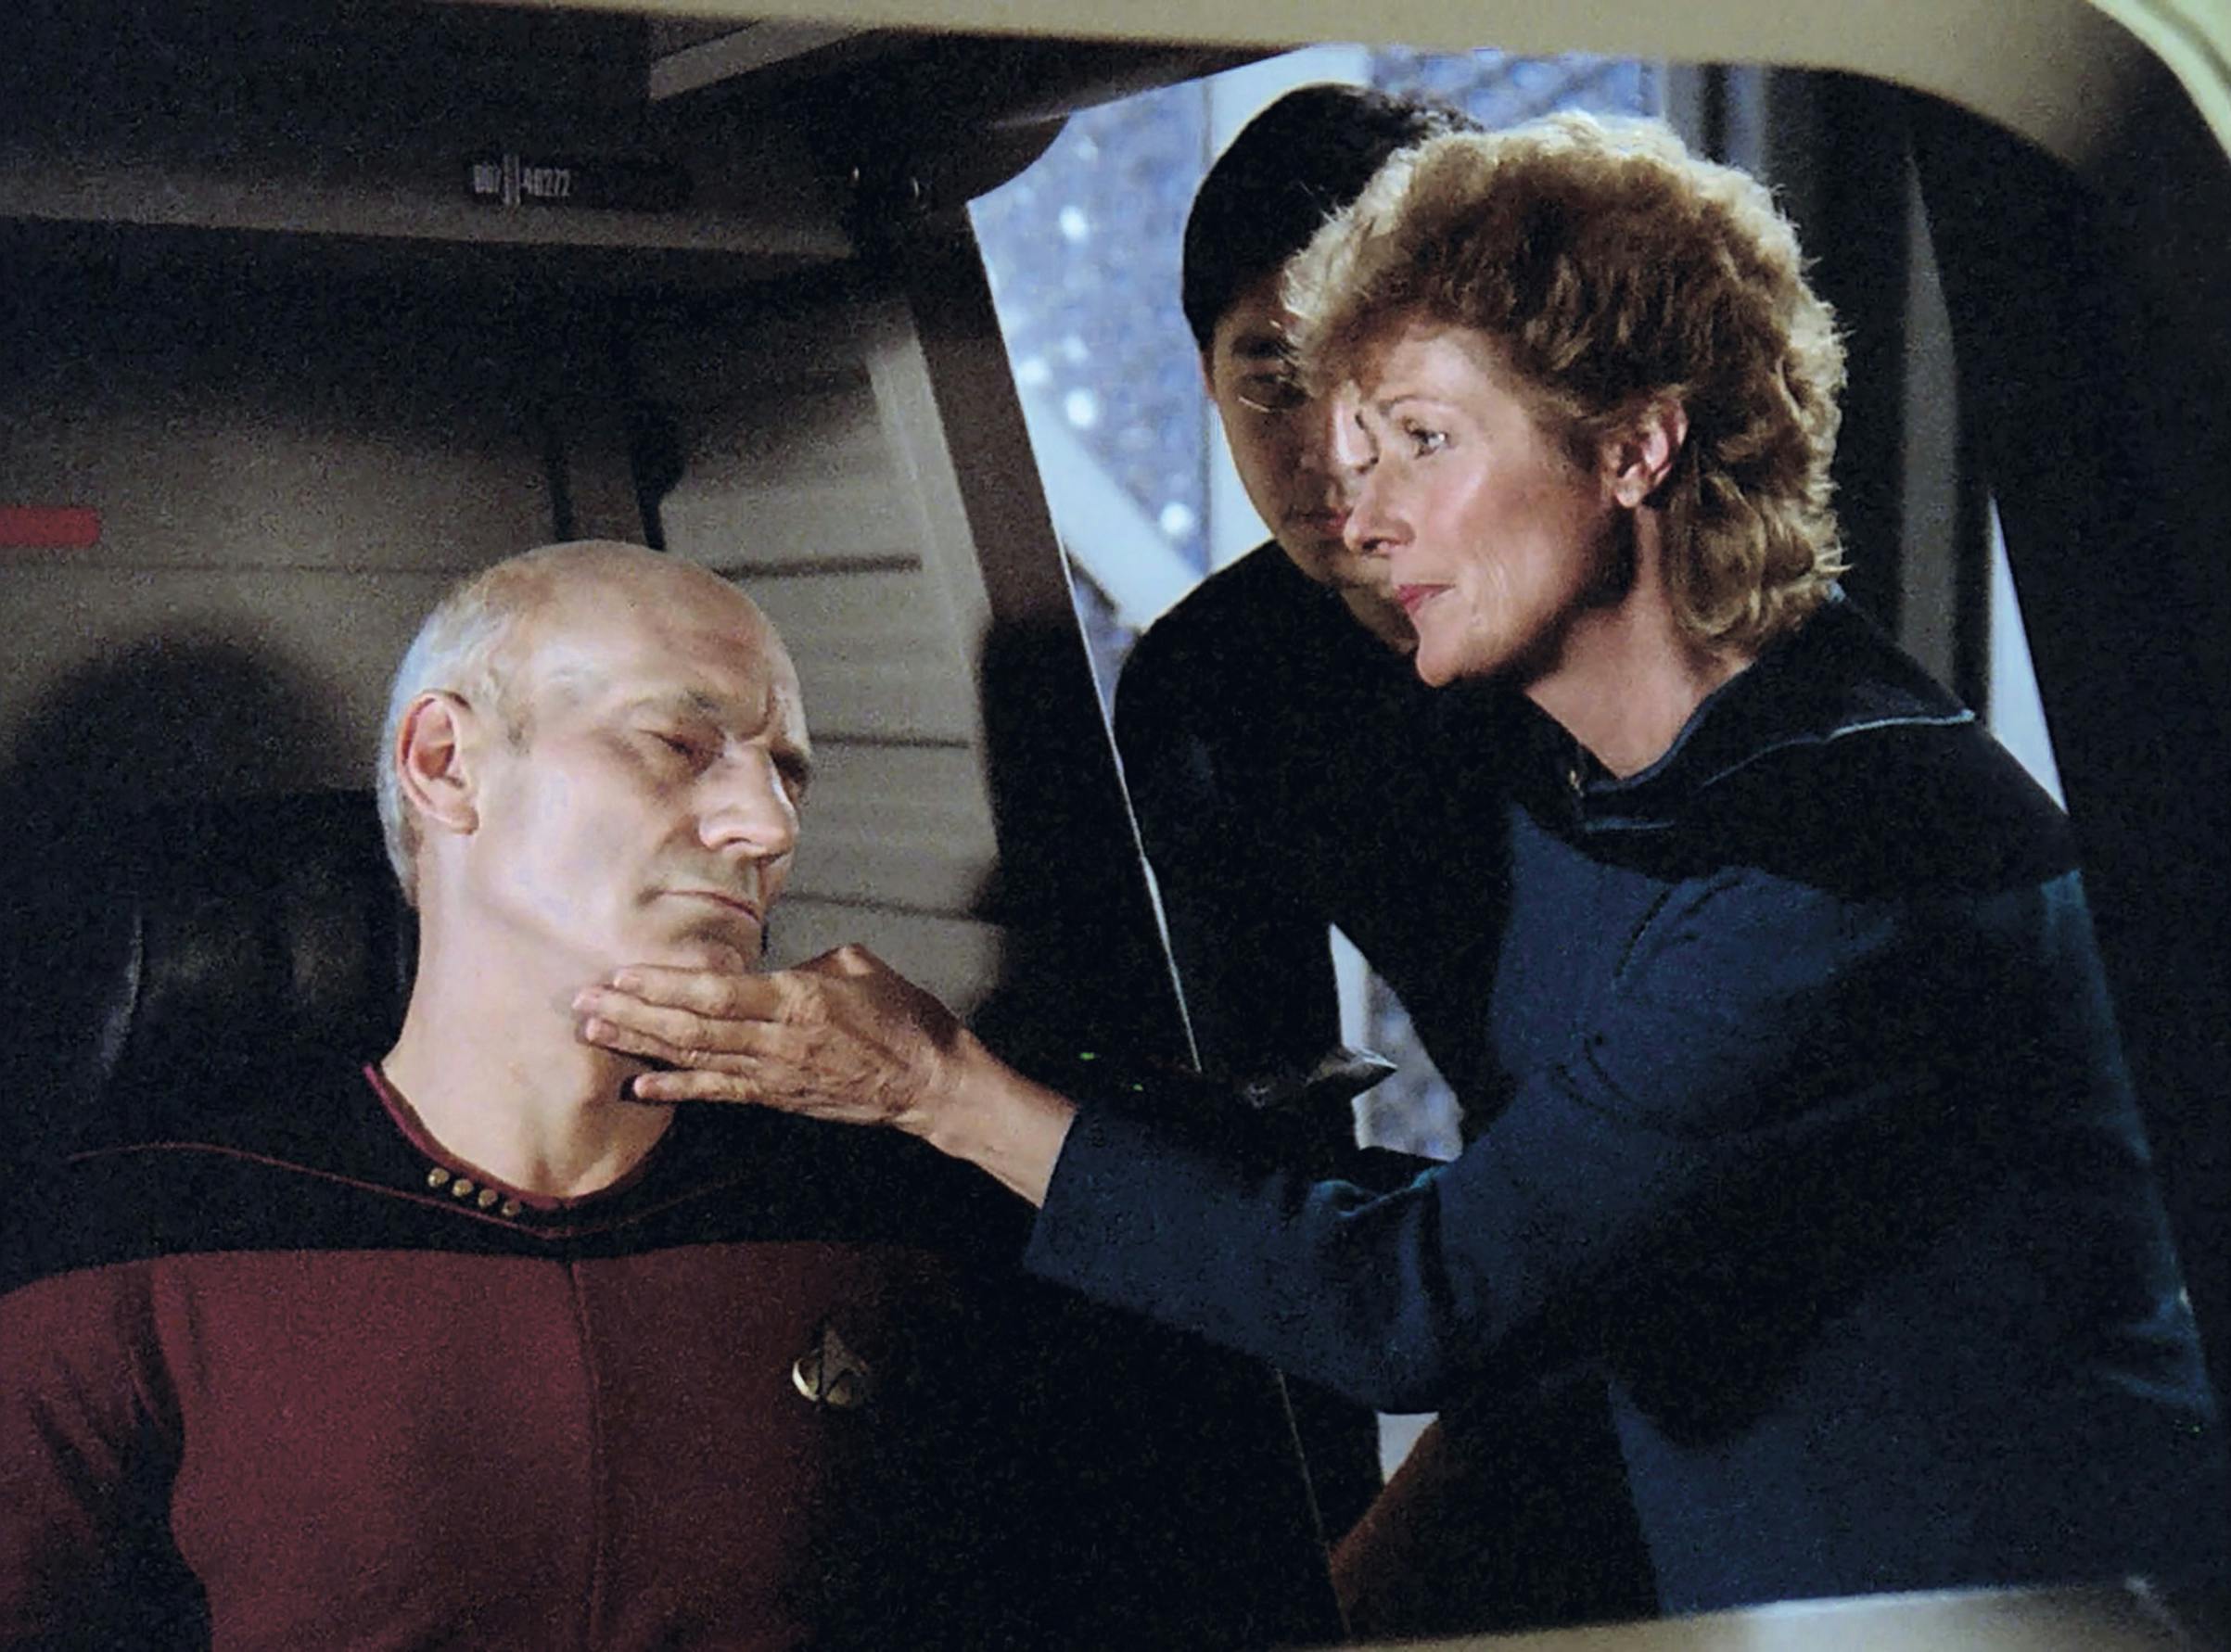 Dr. Pulaski scans the brain functions of an unconscious Jean-Luc Picard found in their Federation shuttle in 'Time Squared'